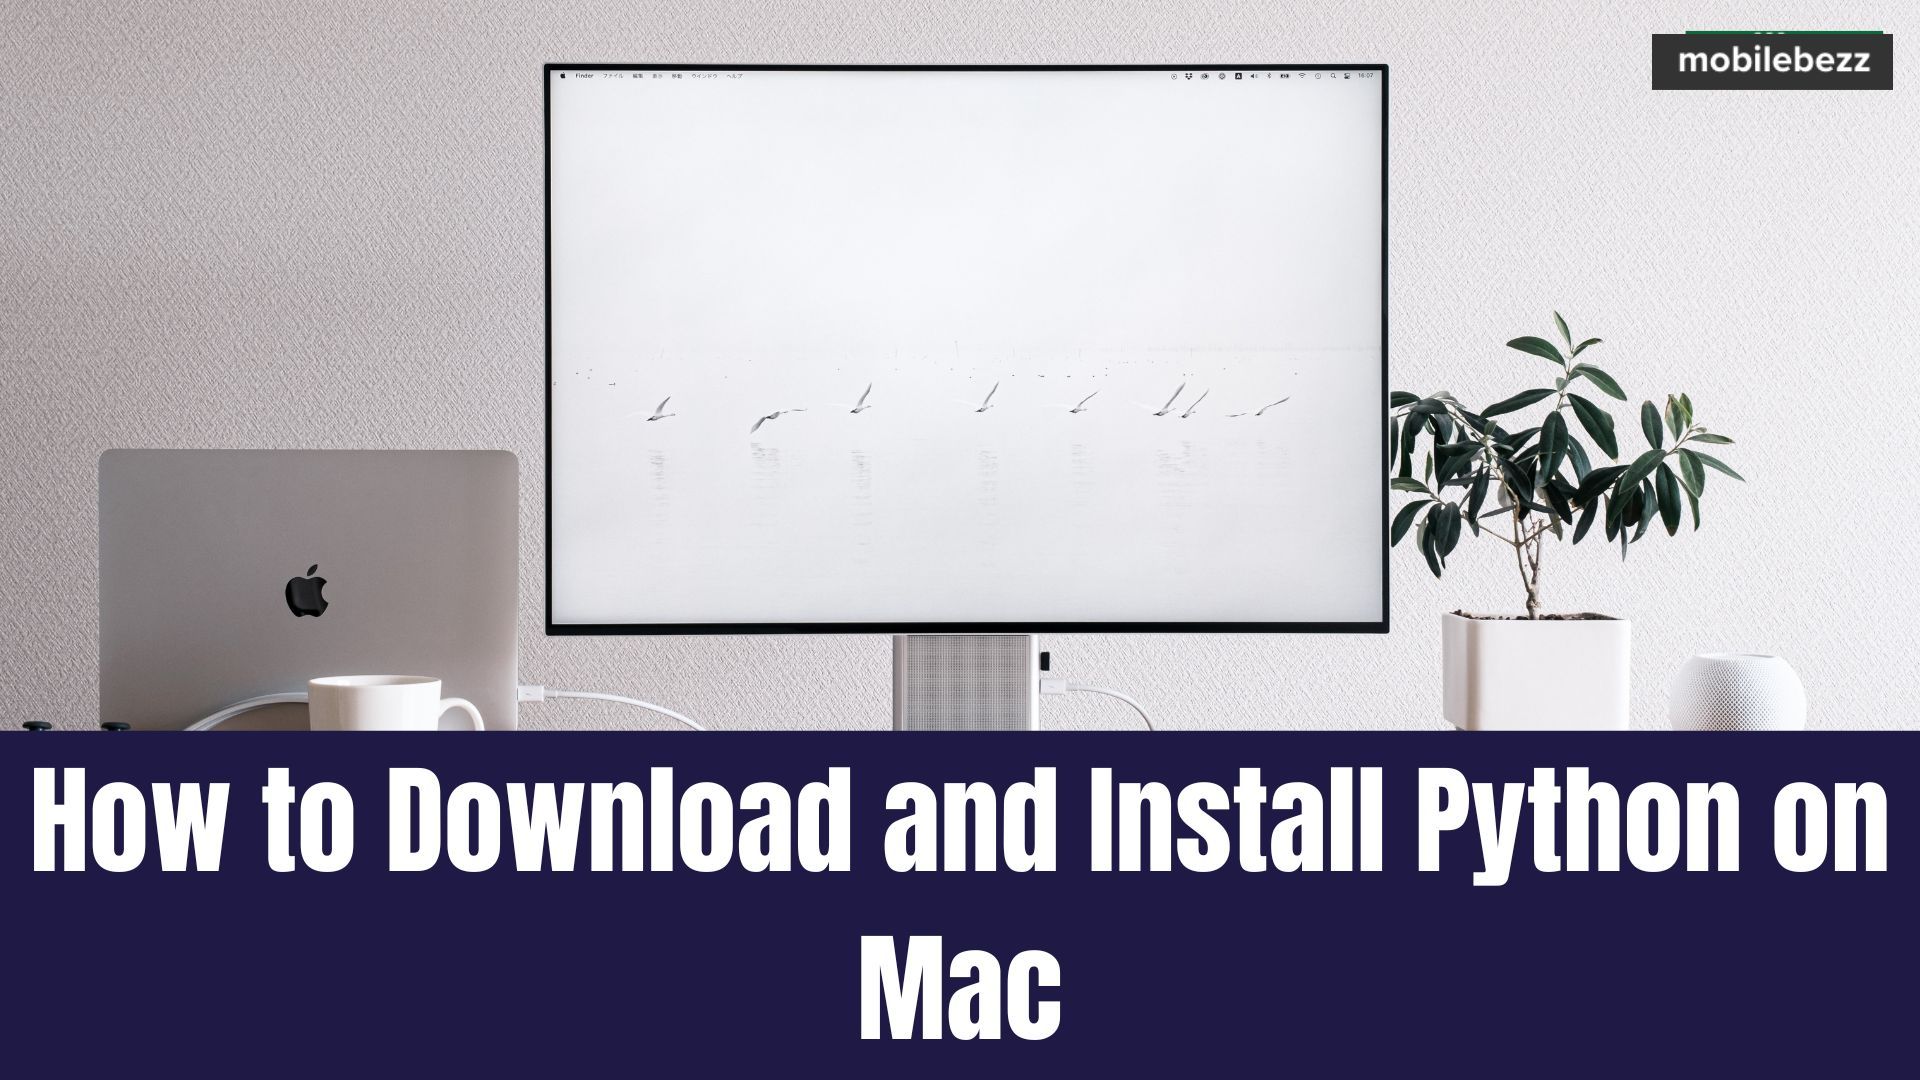 how to download python on a mac